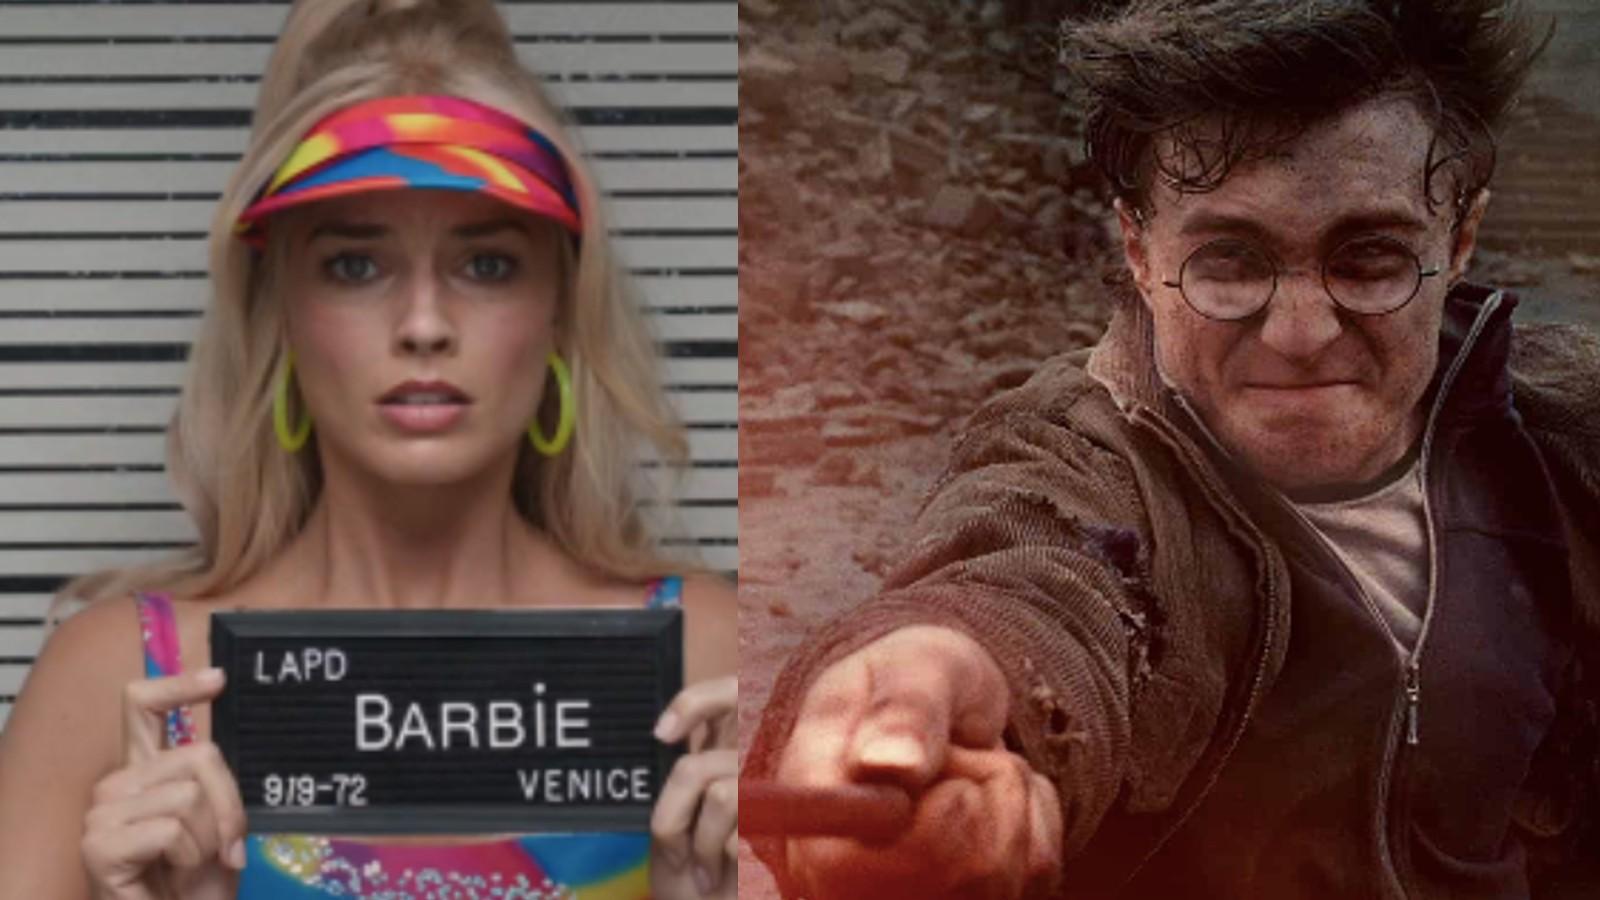 Margot Robbie as Barbie and Daniel Radcliffe as Harry Potter